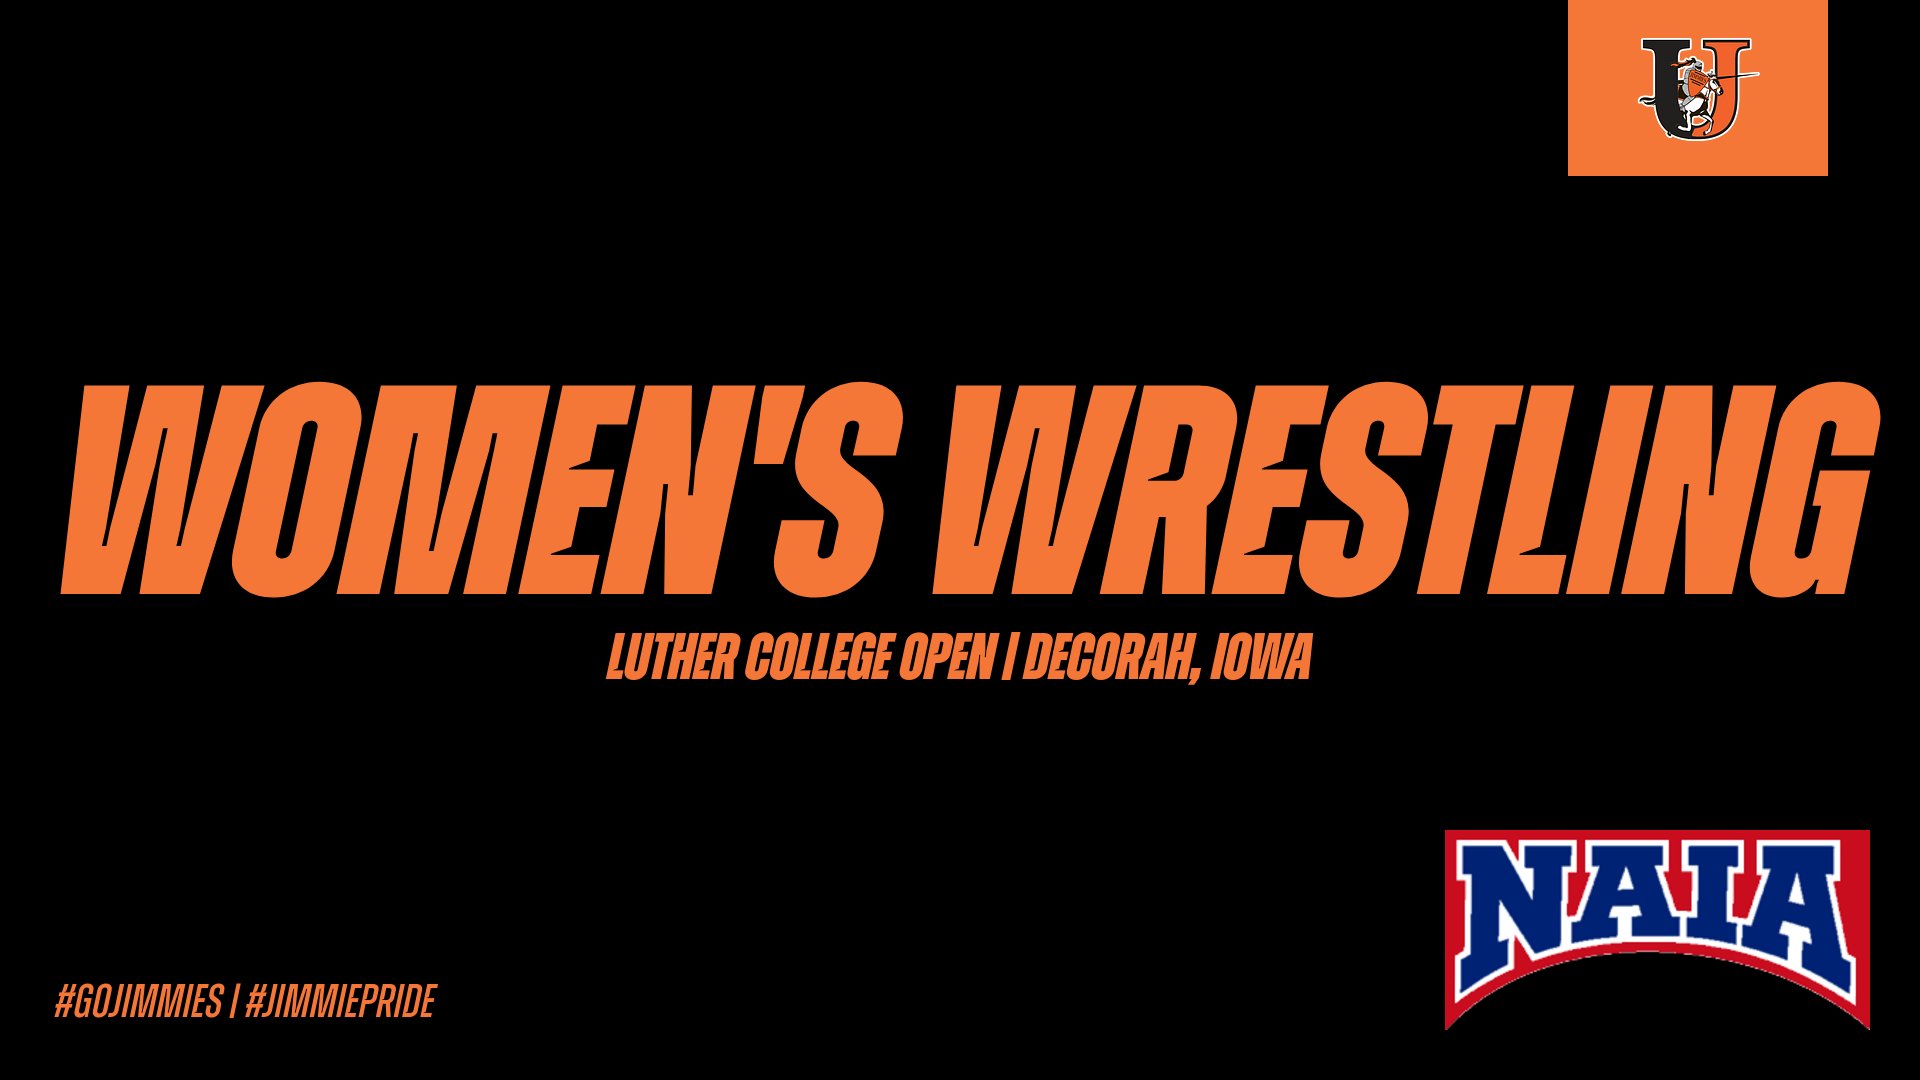 Women's wrestling begins season at Luther College Open